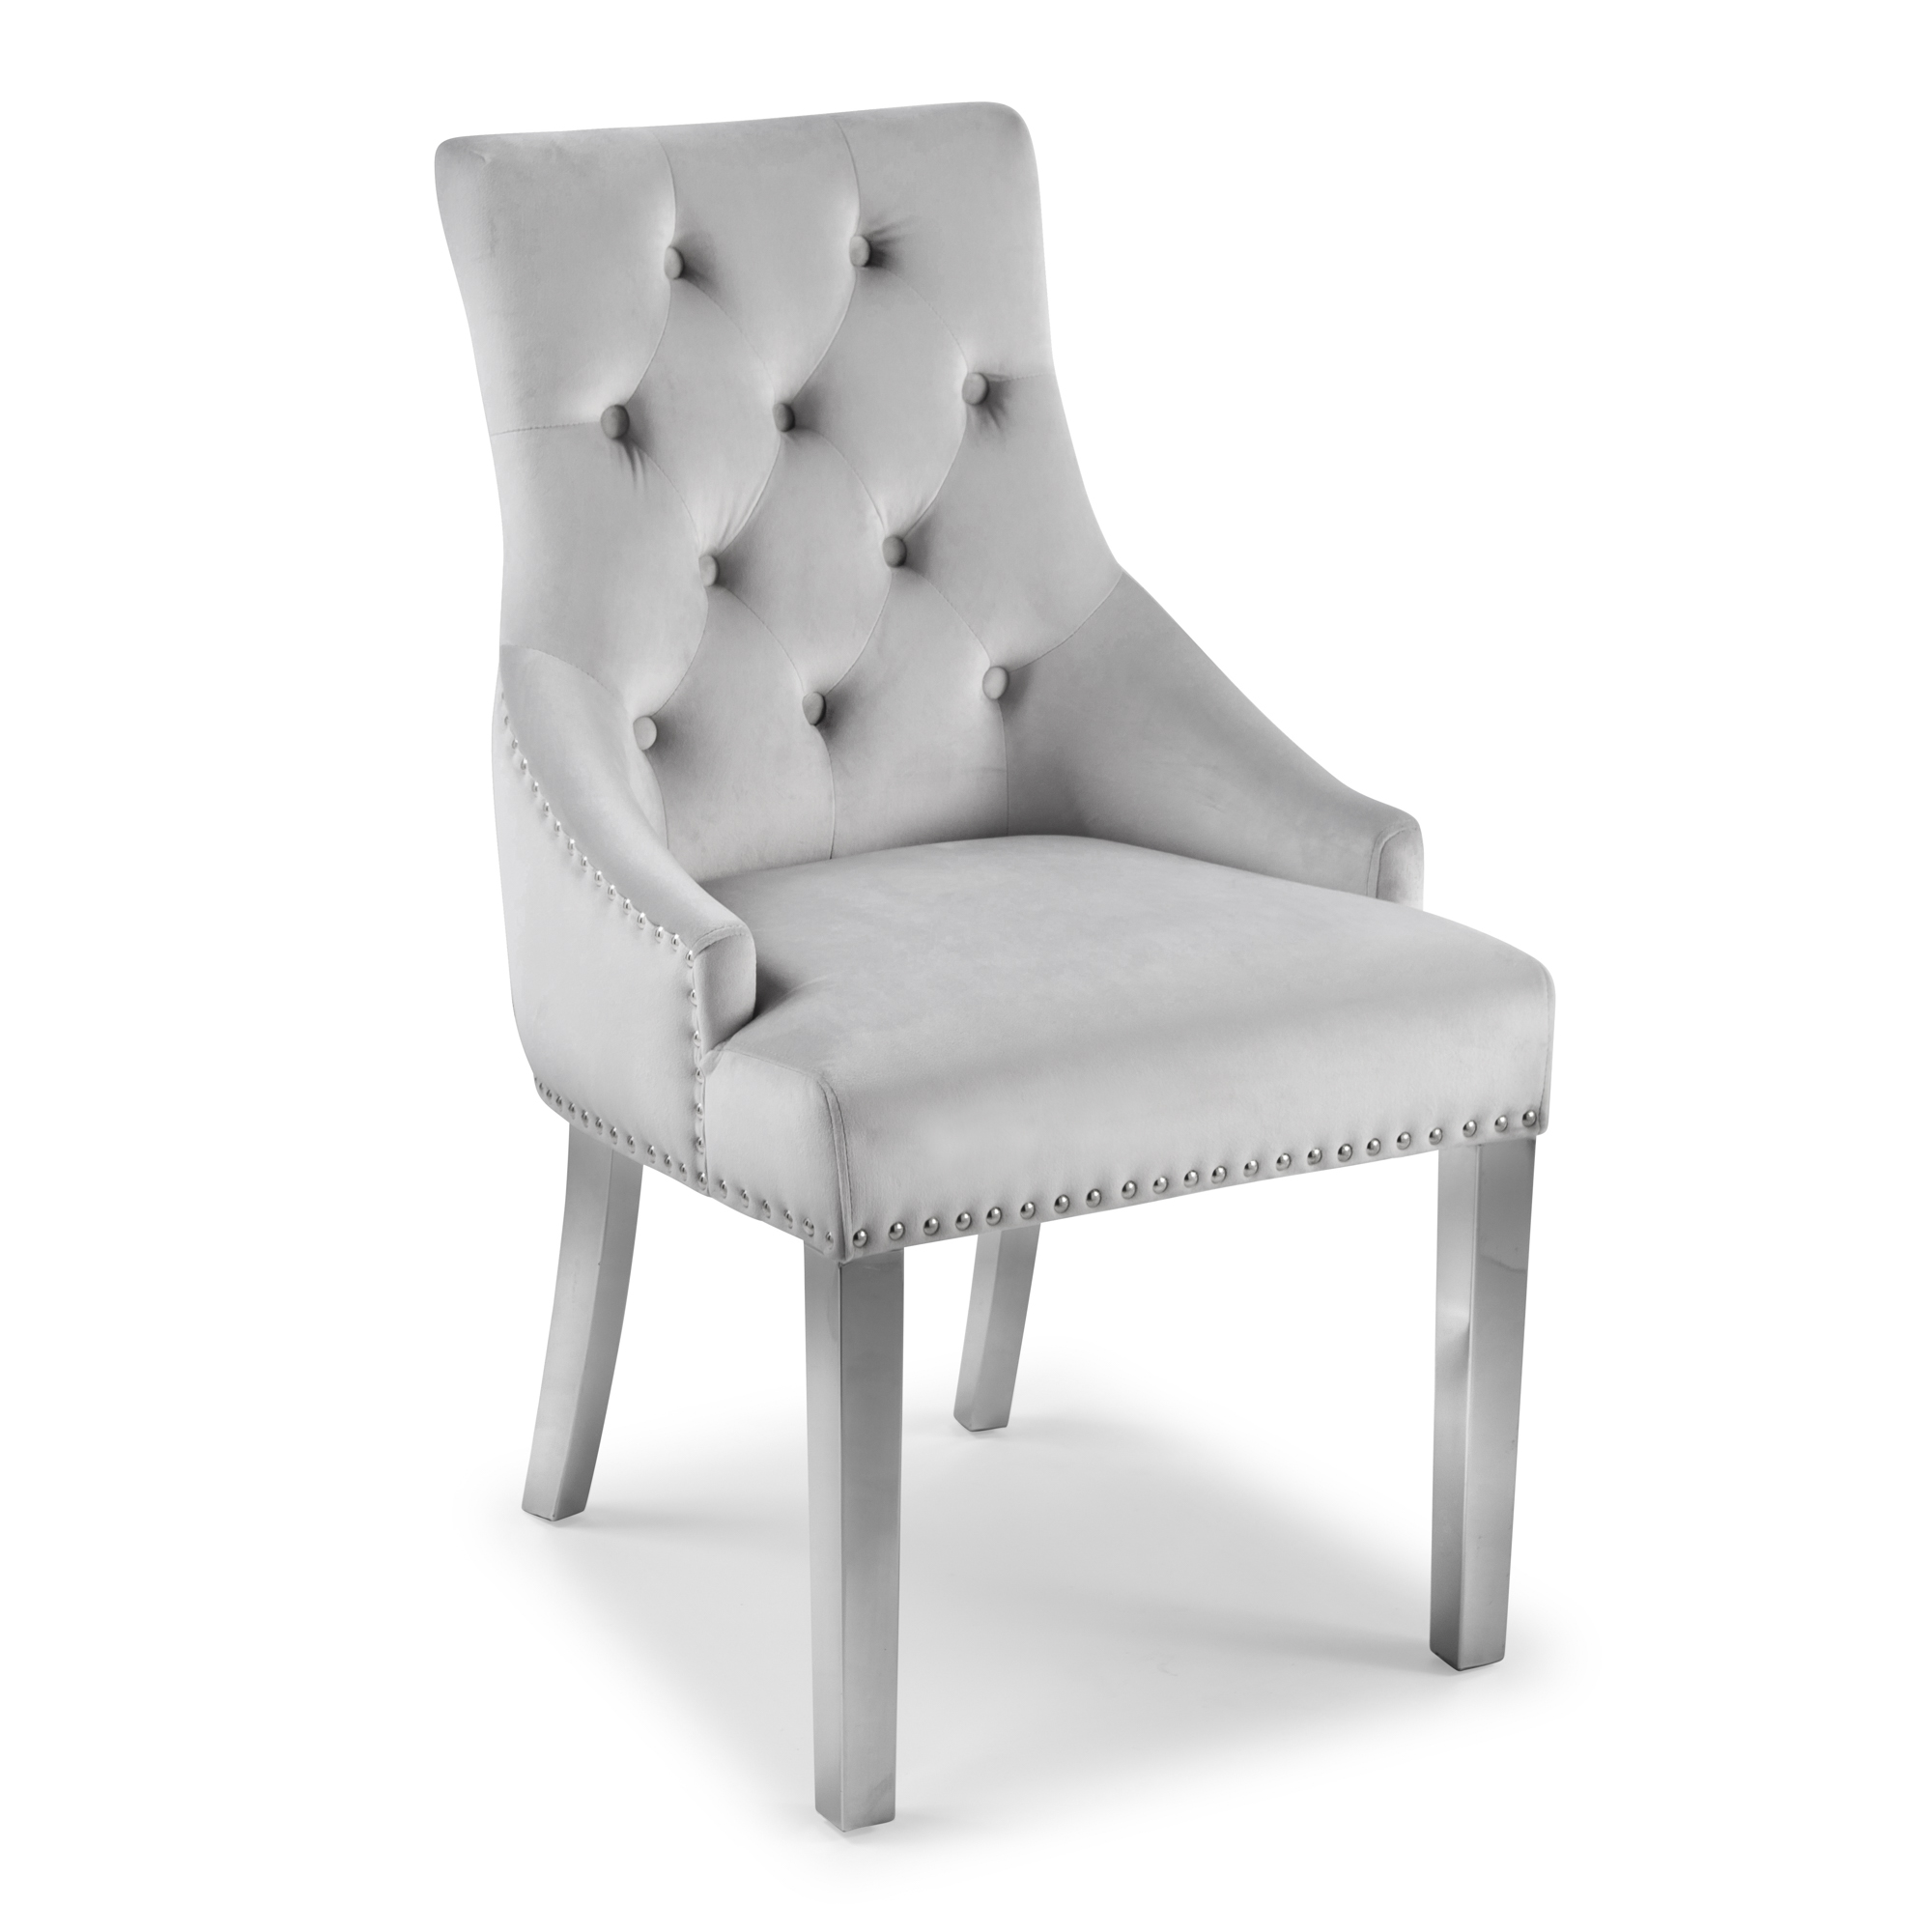 Dove Grey Brushed Velvet Upholstered Scoop Dining Chair with Hoop